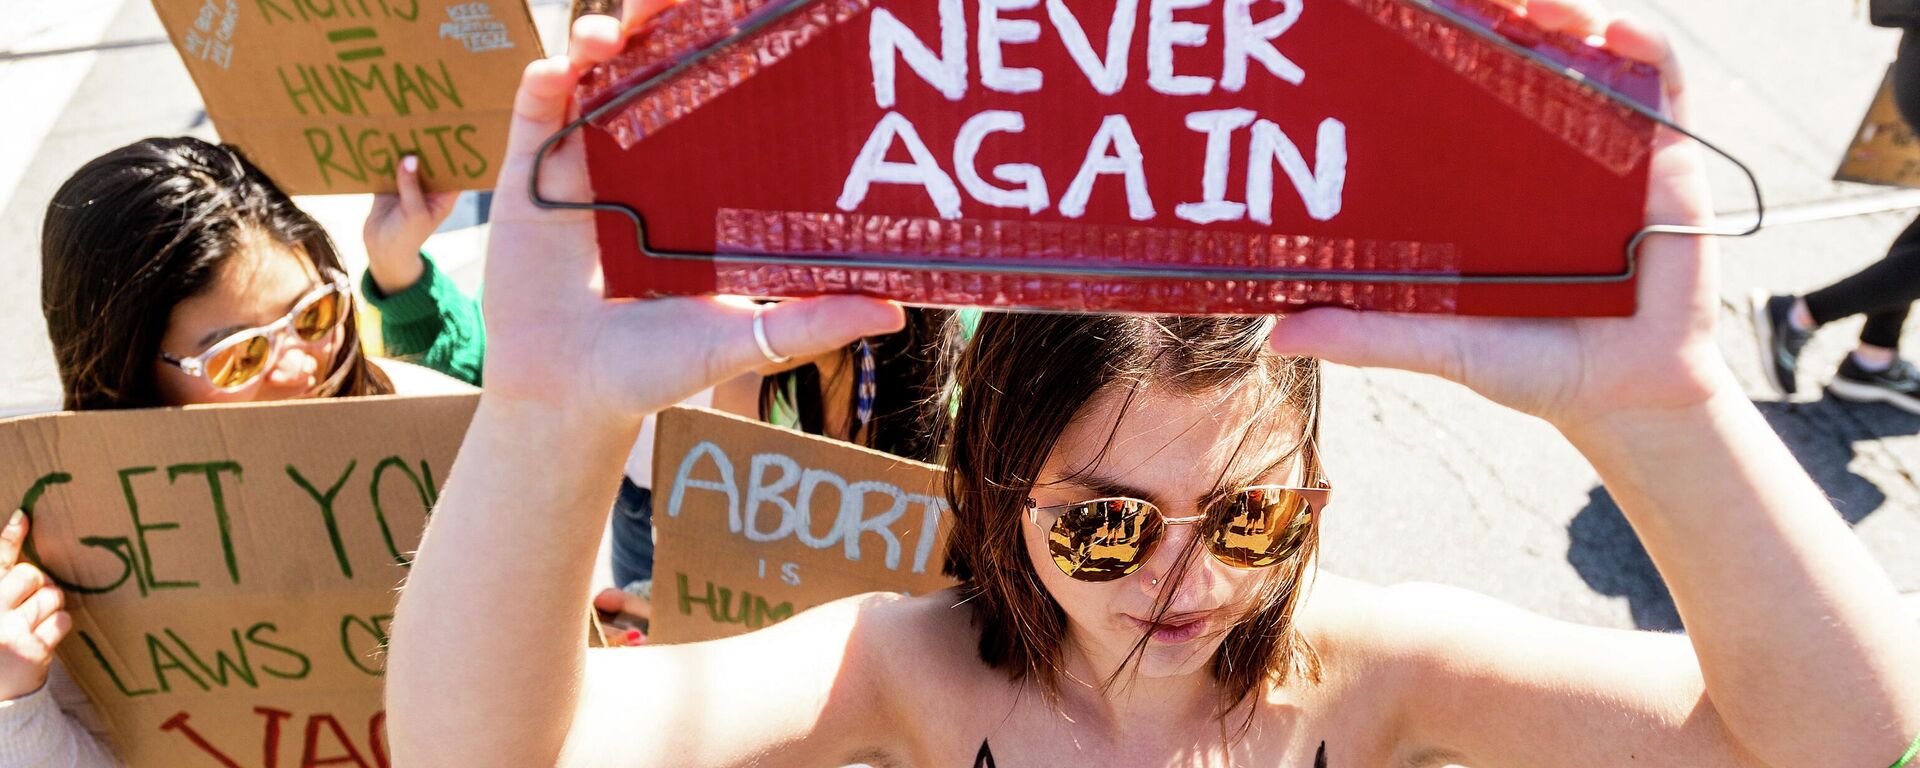 Katie Lippert, 24, joins other abortion-rights protesters in San Francisco's Castro District, Saturday, May 14, 2022 - Sputnik International, 1920, 09.06.2022